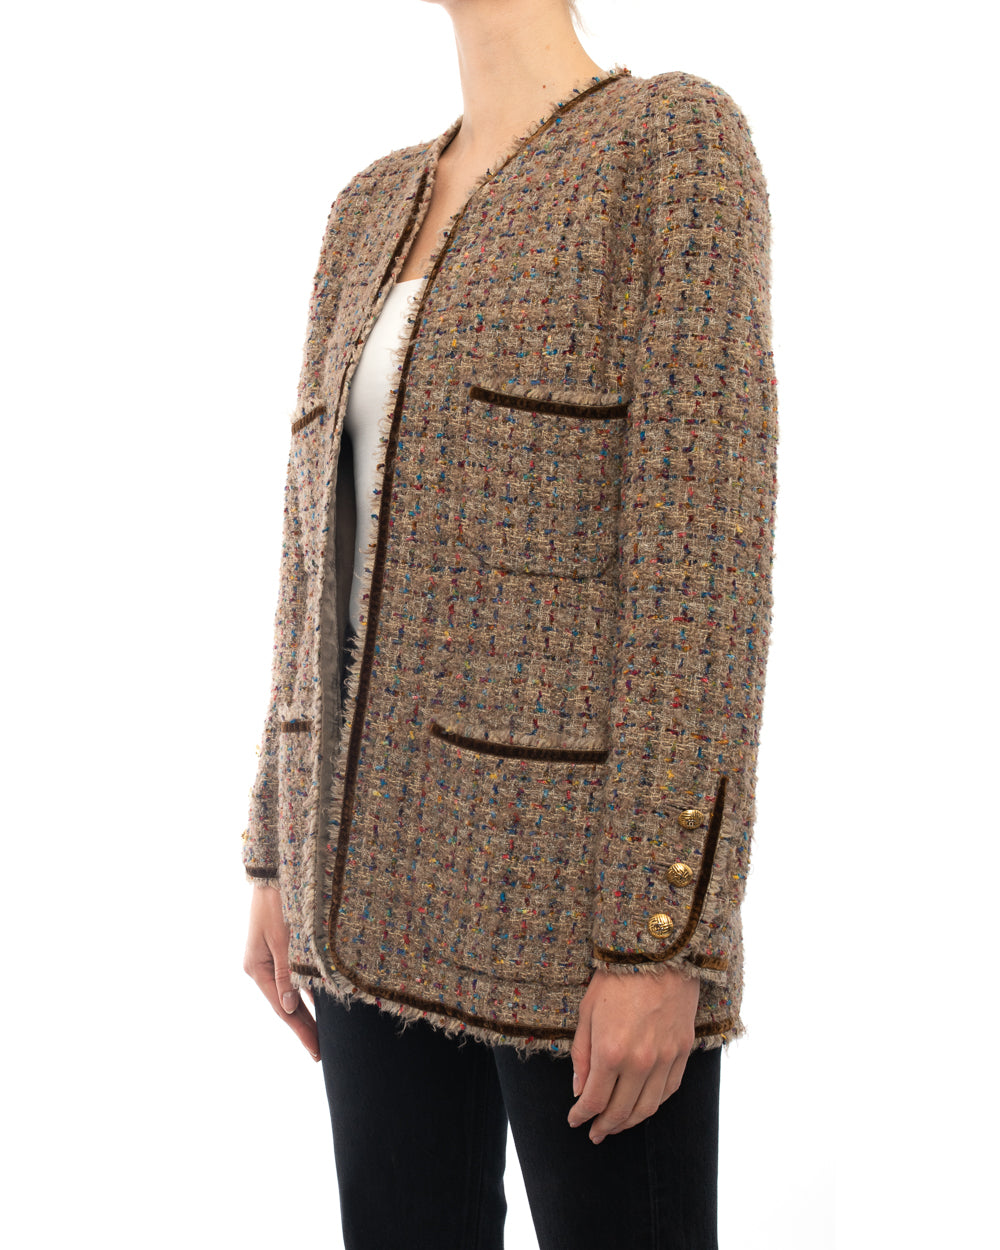 Chanel 1986 Vintage Brown Tweed Jacket with Gold CC Buttons - 42 / 10 – I  MISS YOU VINTAGE